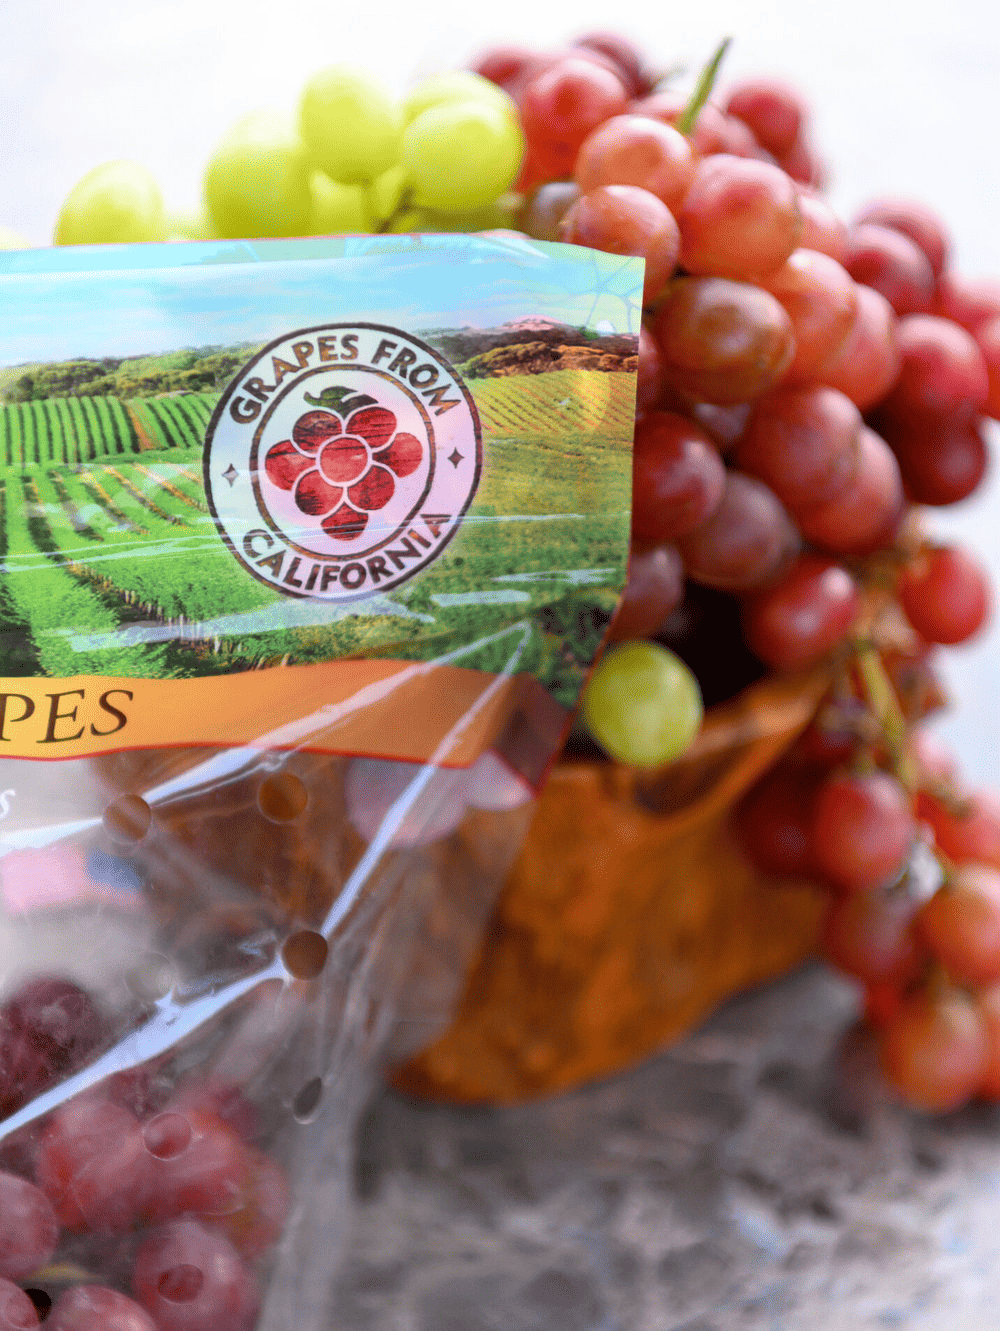 Grapes from California logo on package by Alycia Moreno - table grapes